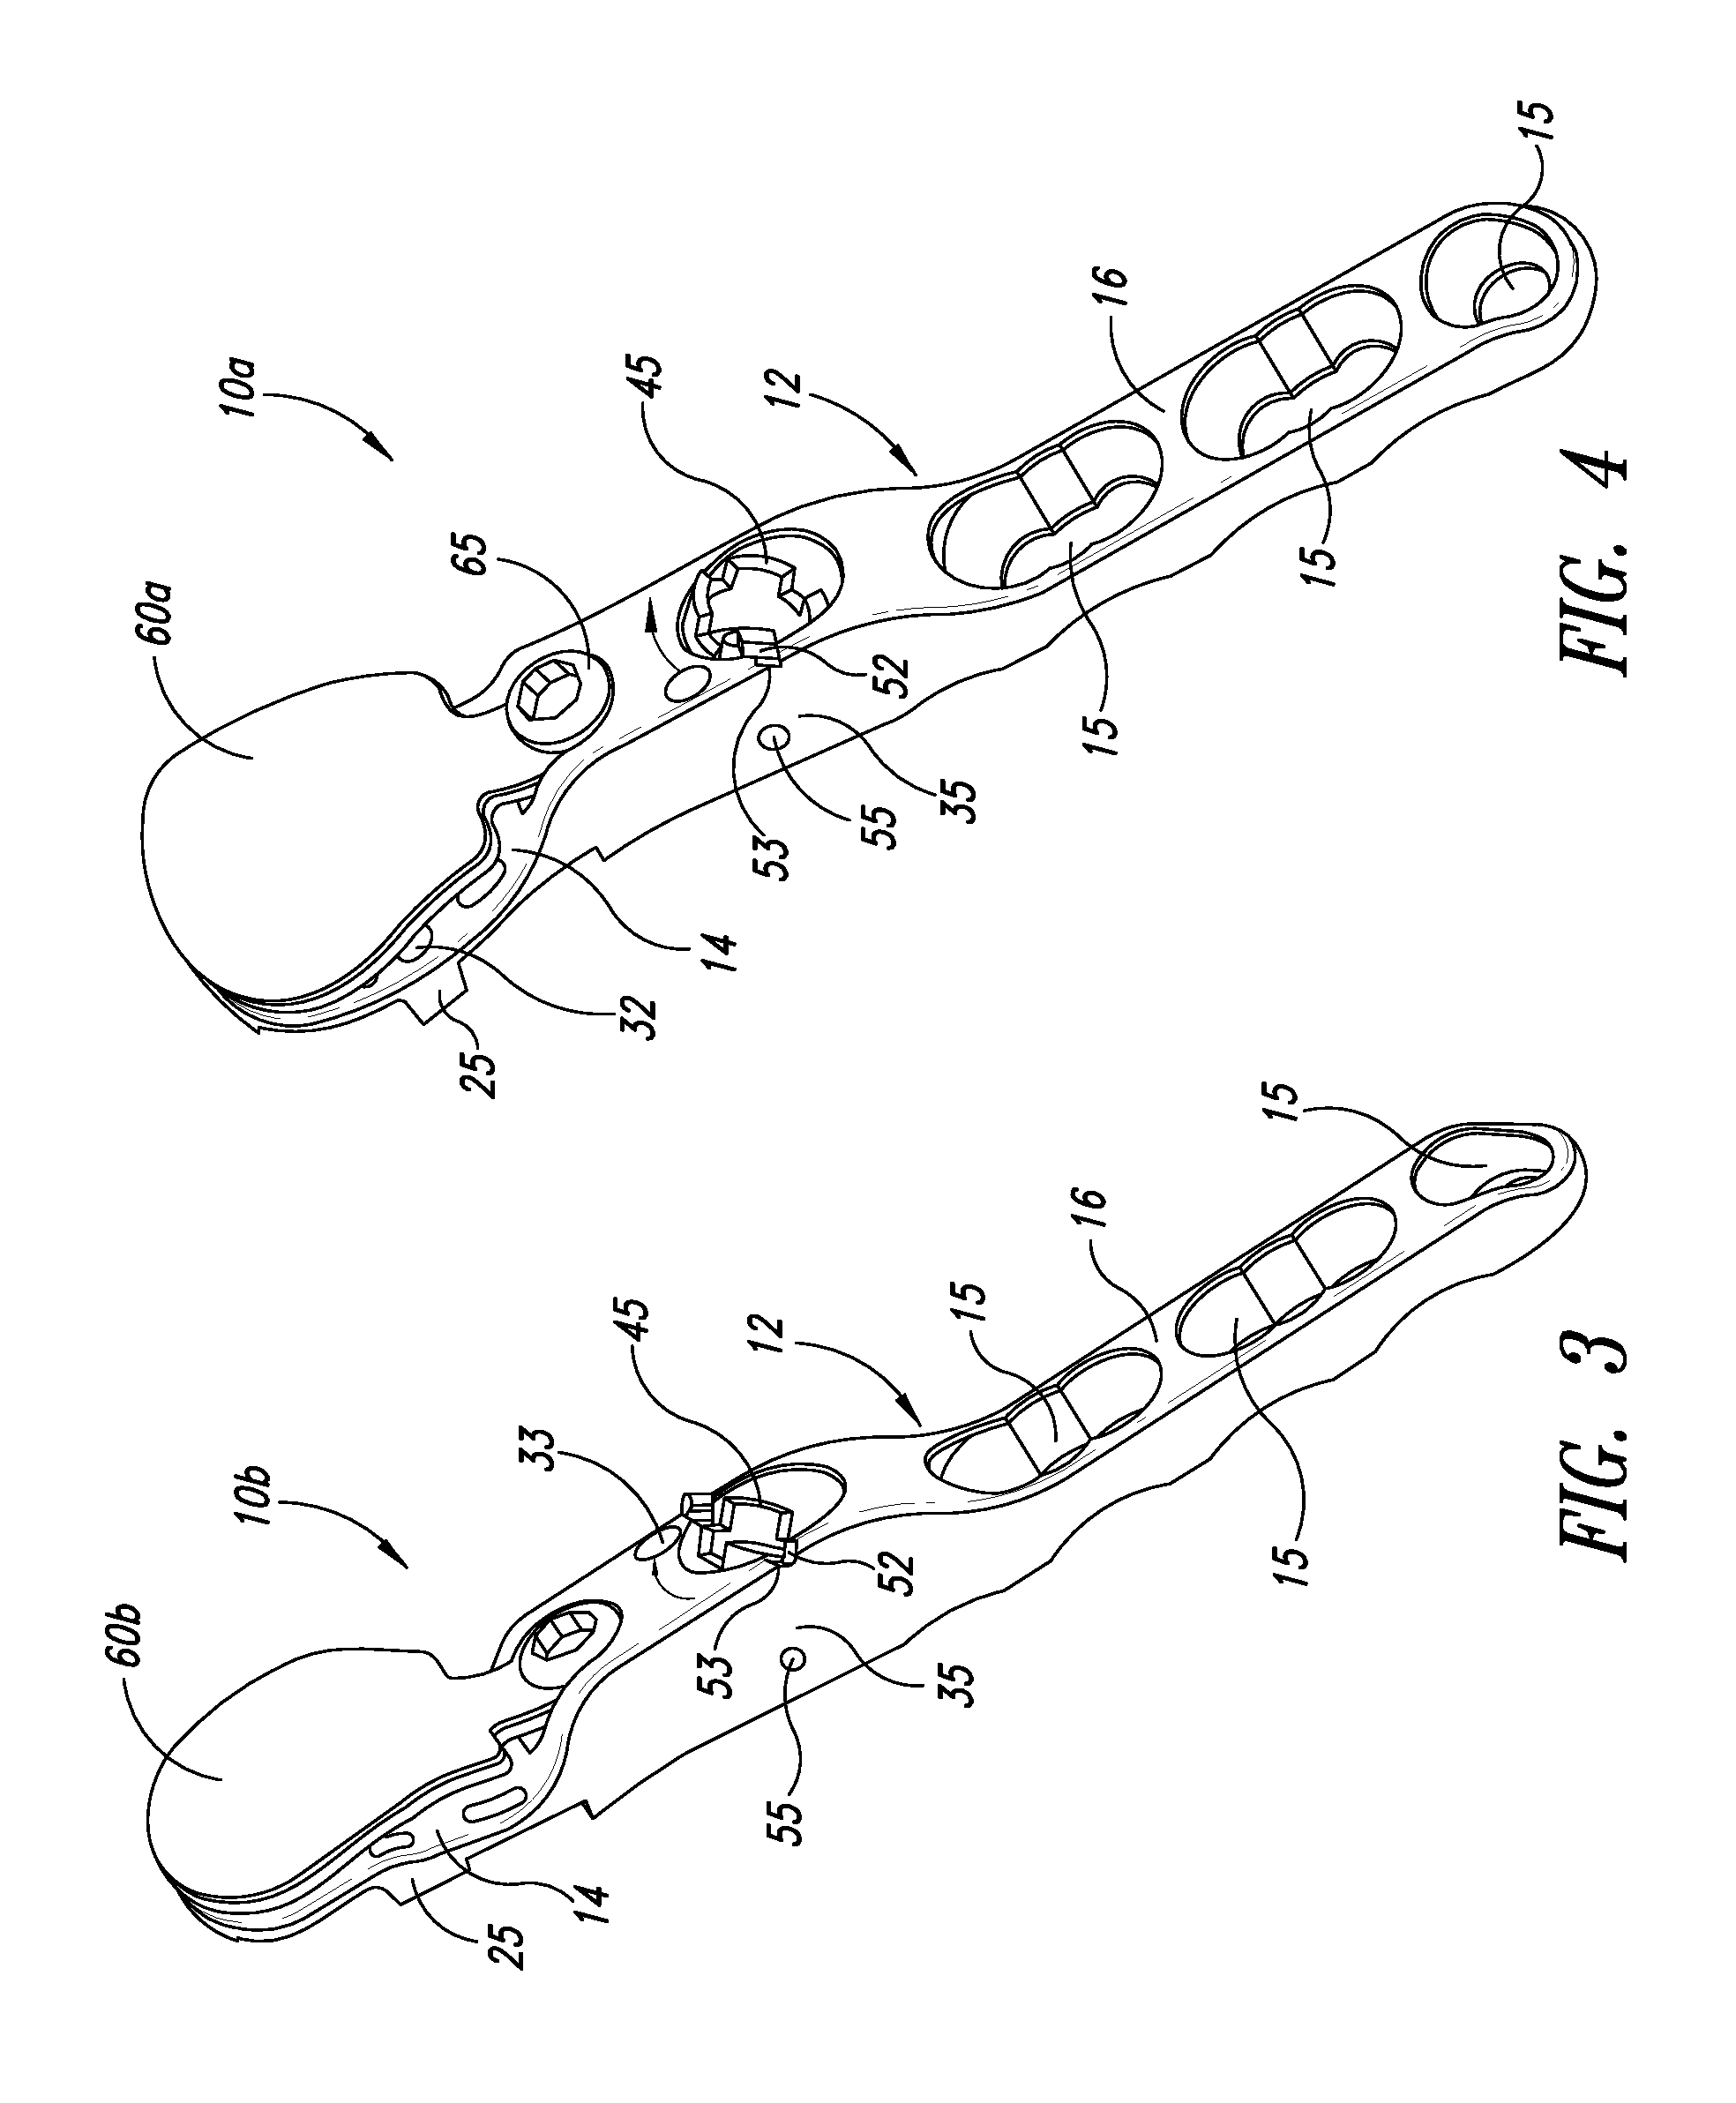 Device for the ostheosynthesis of proximal humerus fractures